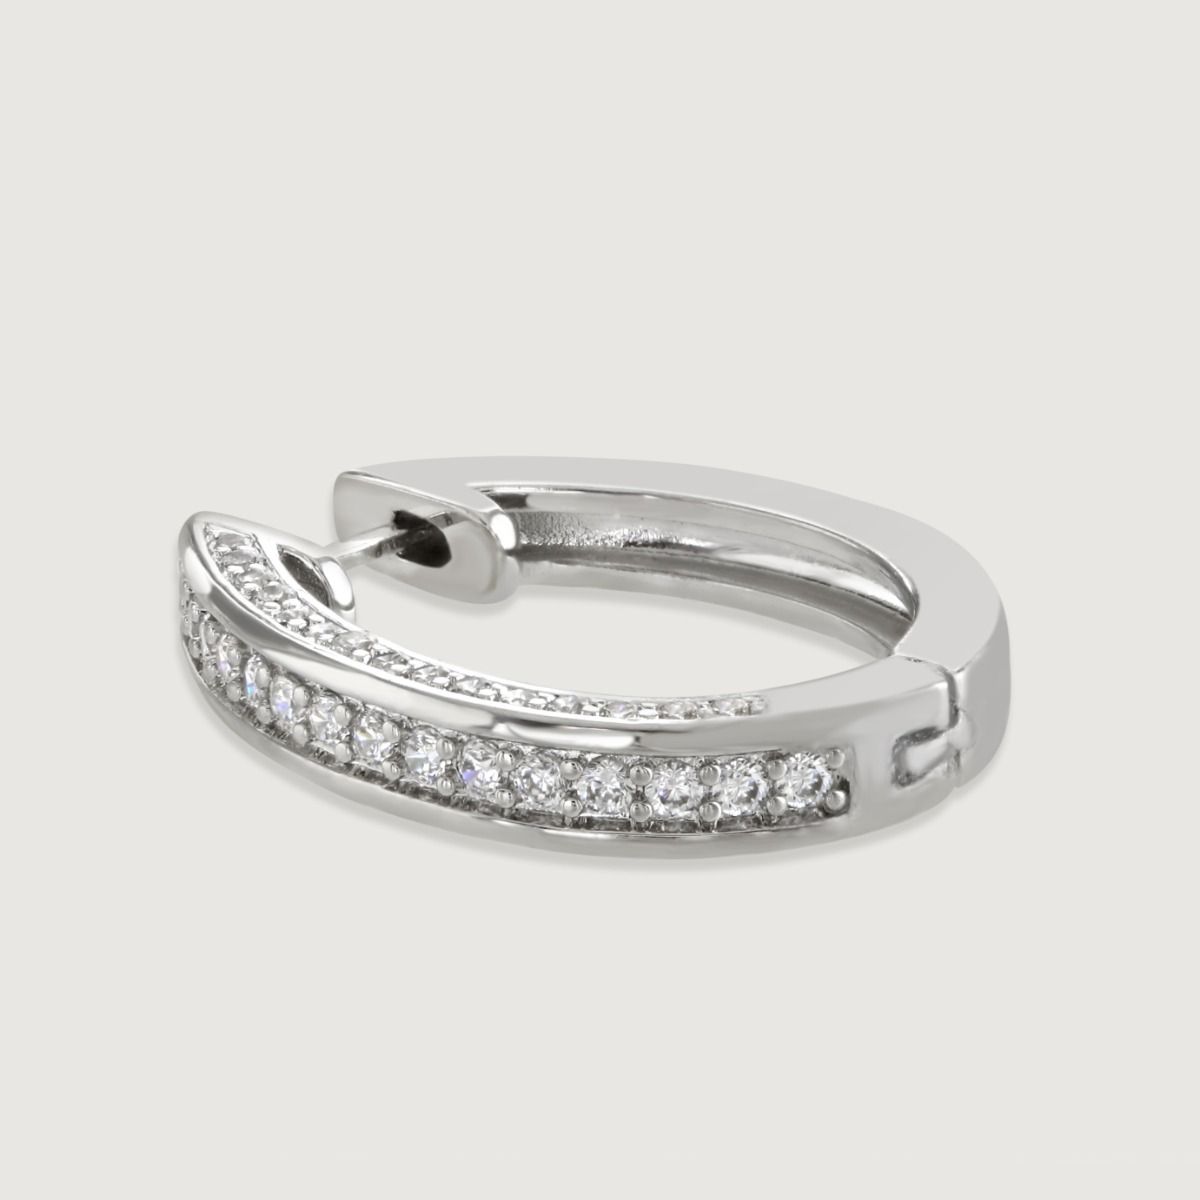 Elevate your style with the Pave and Polished Hoop. This timeless hoop design sparkles with cubic zirconia stones adorning one side, while the hinge onward showcases a sleek, polished band. A perfect blend of elegance and simplicity for a sophisticated lo